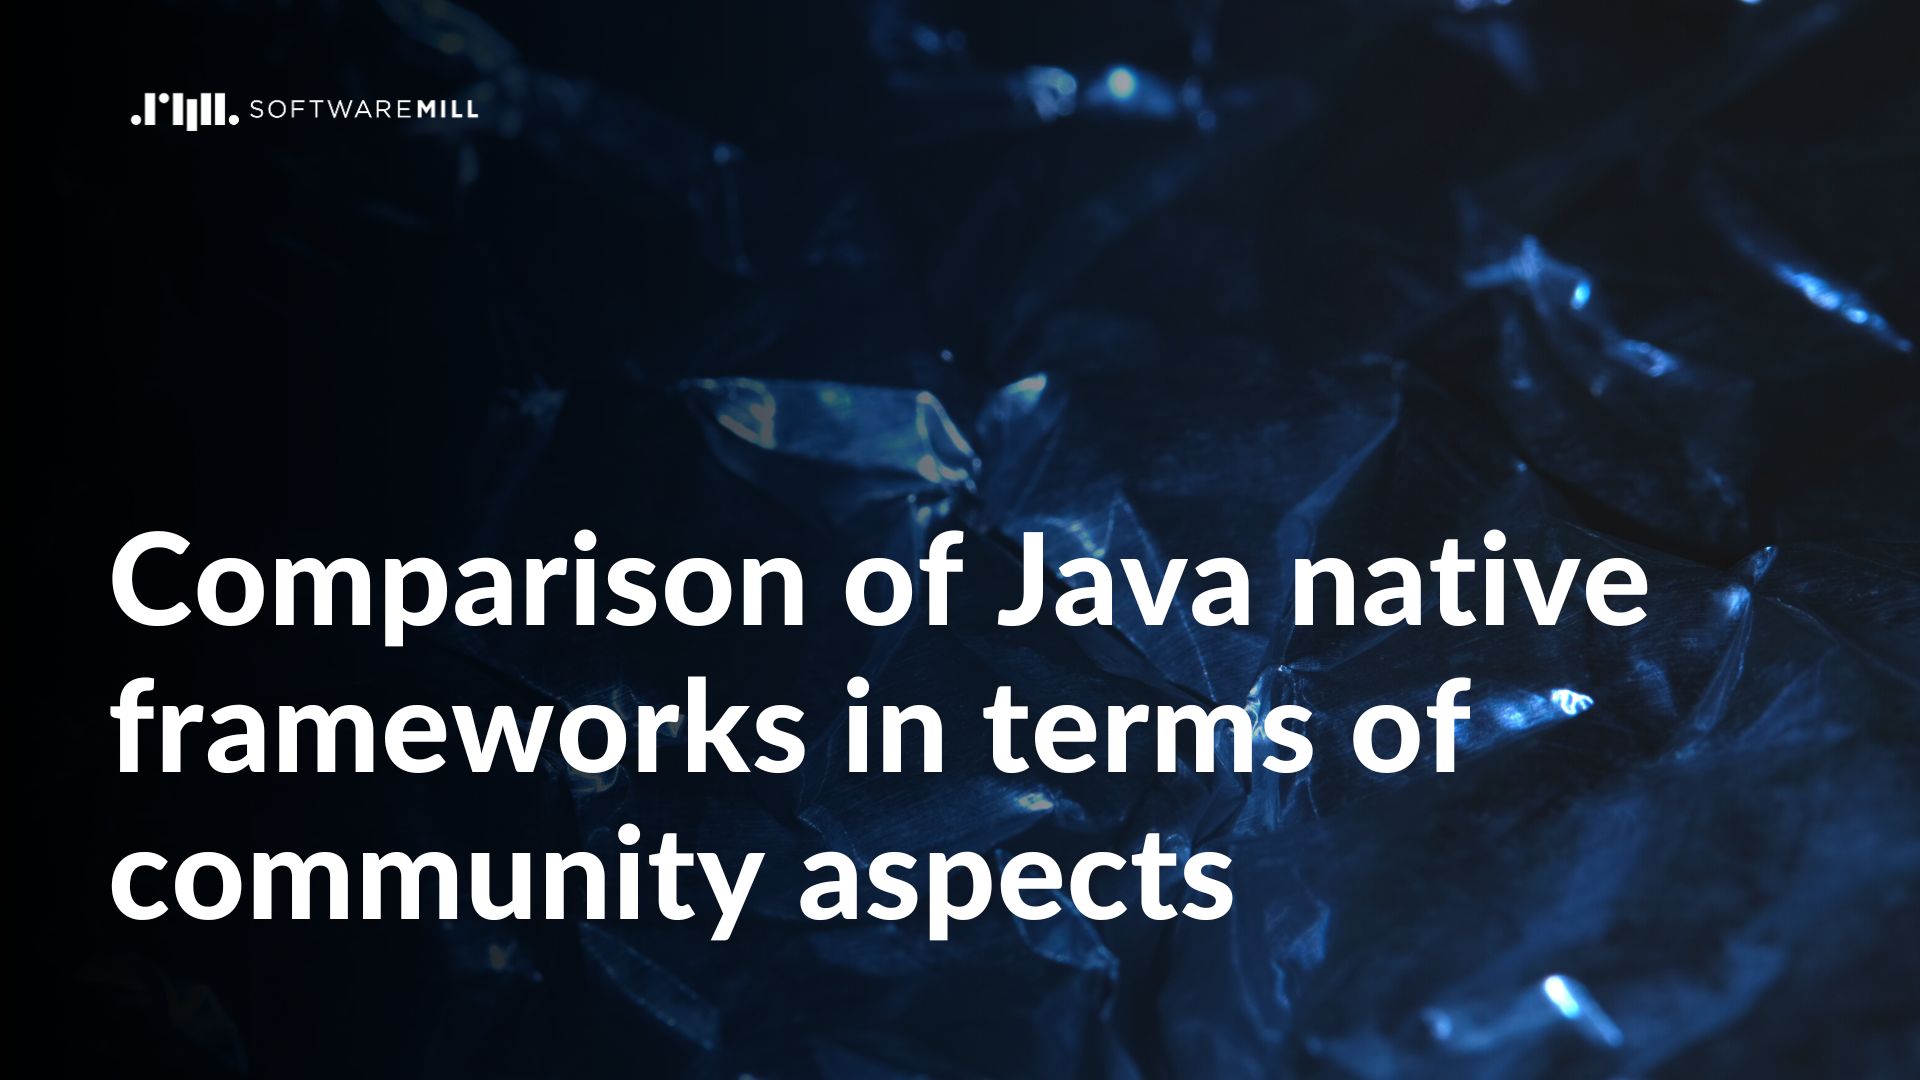 Comparison of Java native frameworks in terms of community aspects webp image